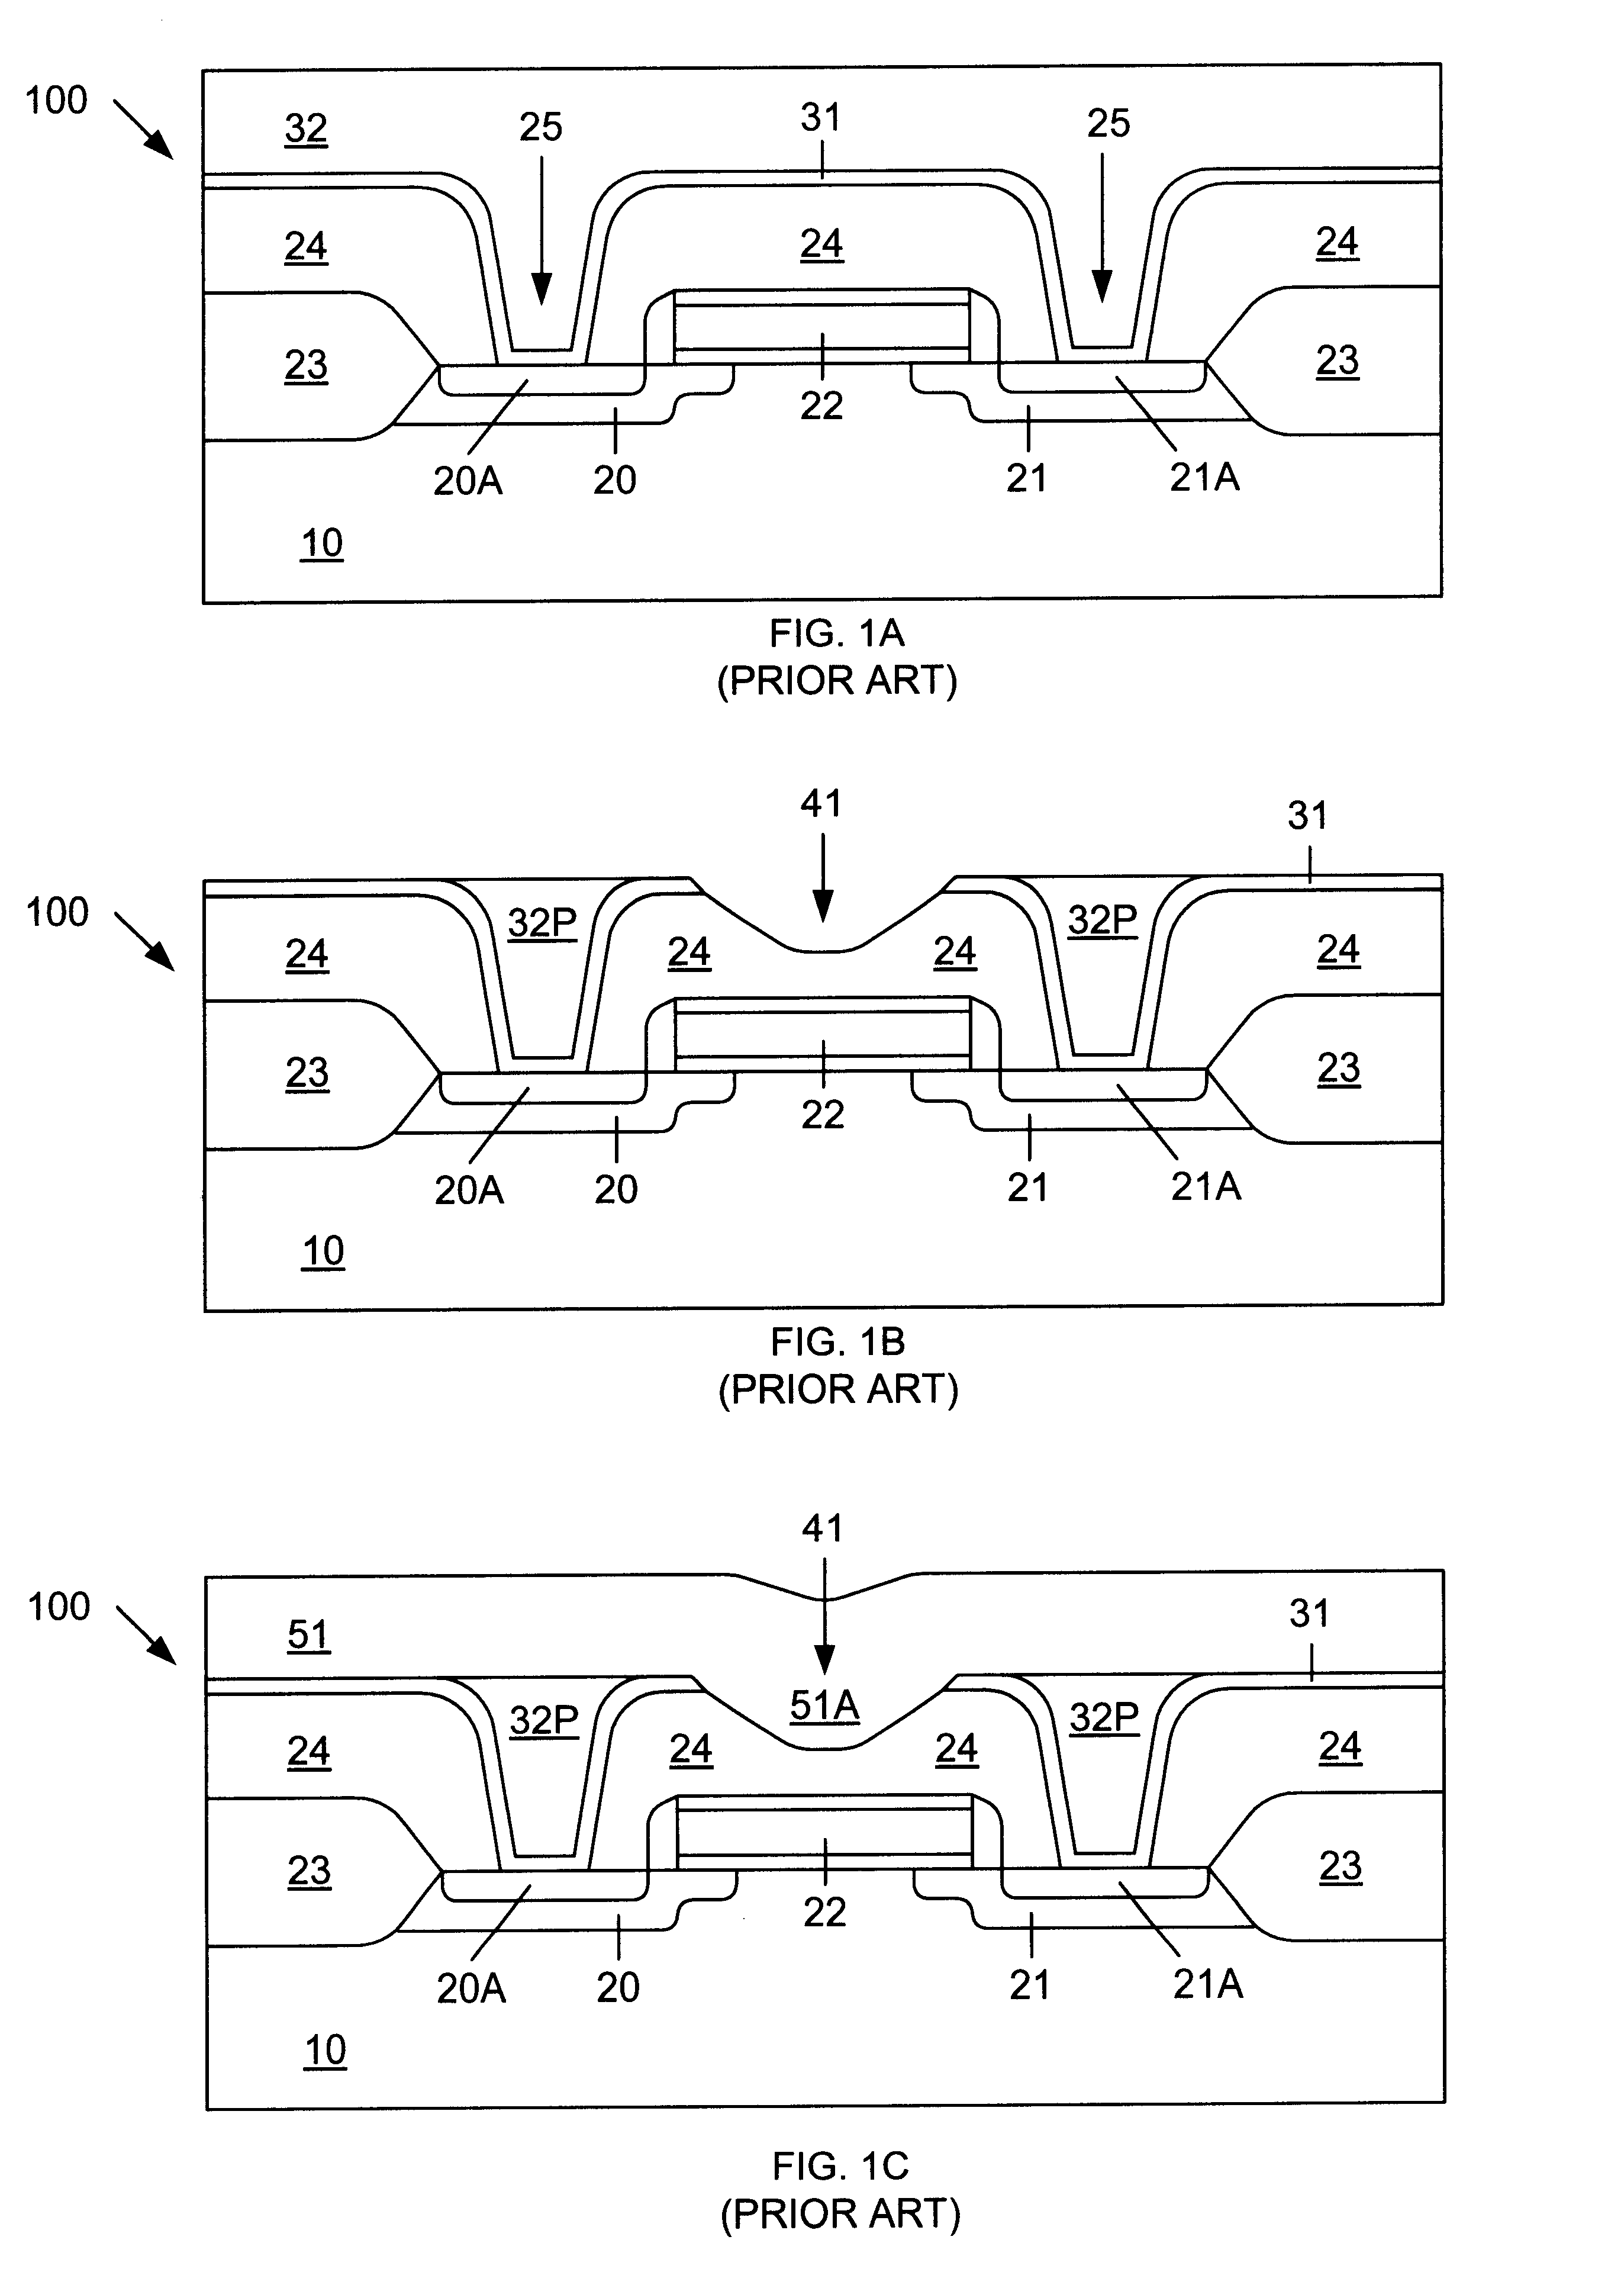 Multi-step tungsten etchback process to preserve barrier integrity in an integrated circuit structure